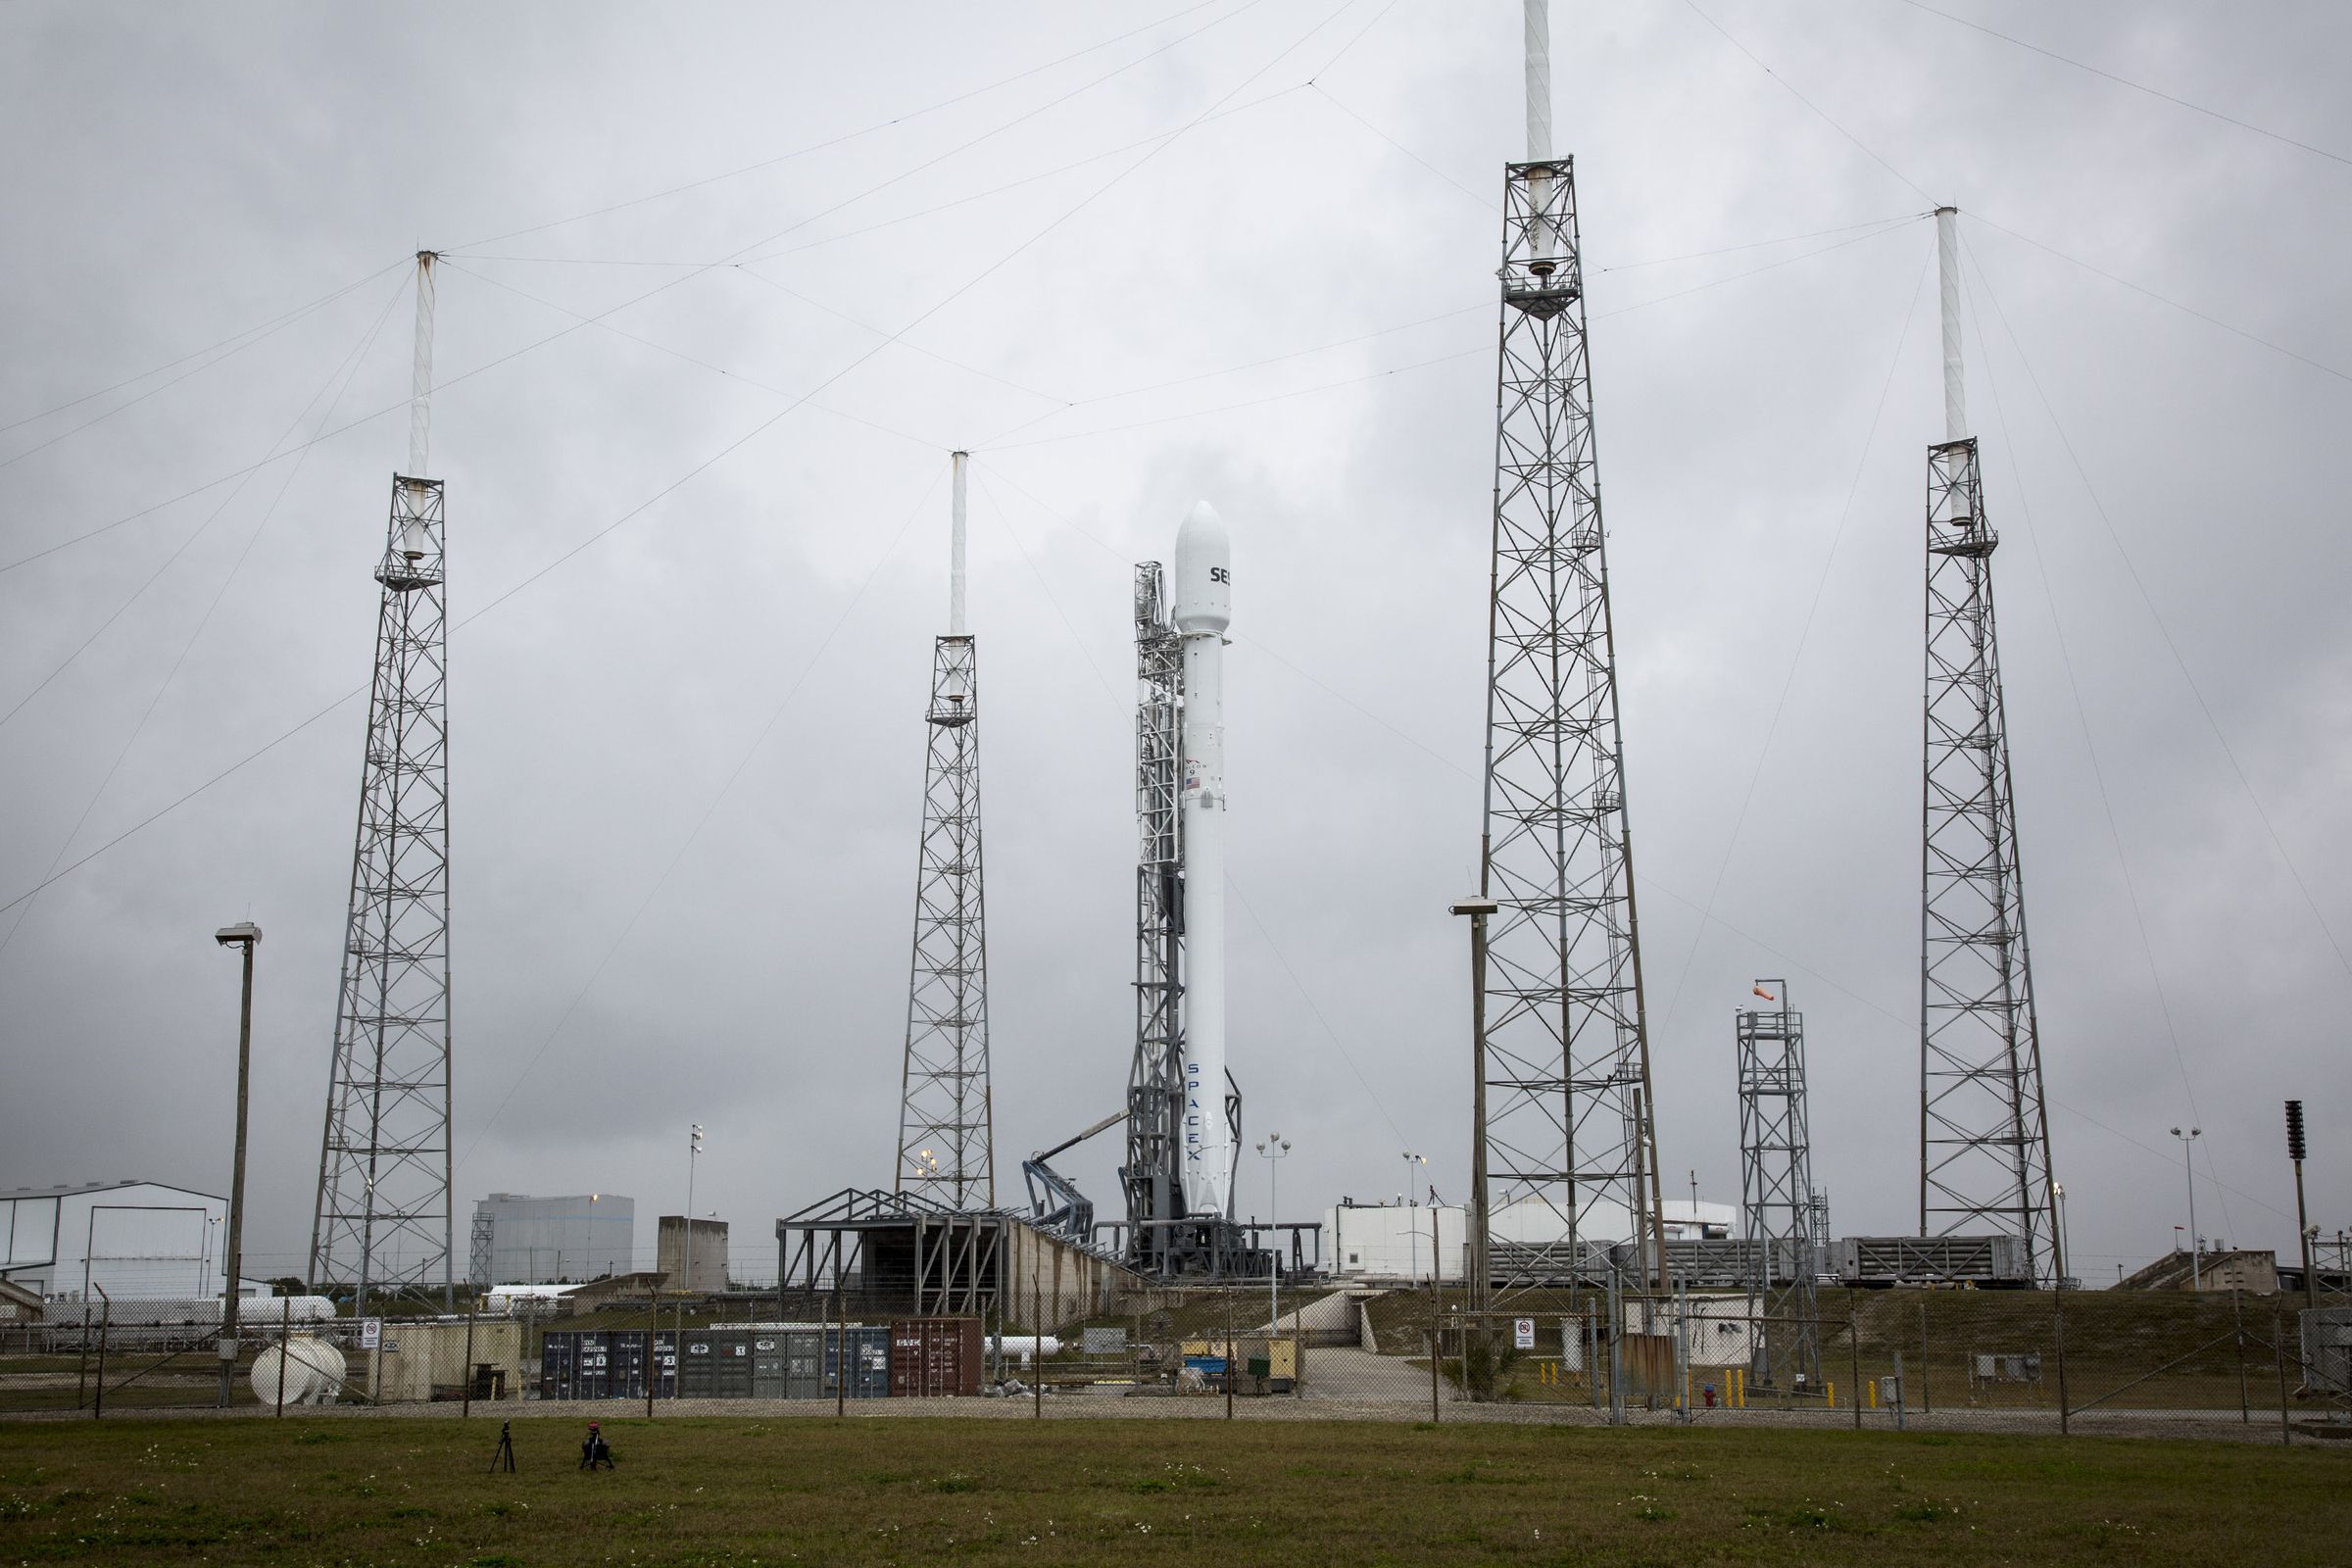 A SpaceX Falcon 9 rocket at the SLC-40 launch pad, prior to the accident